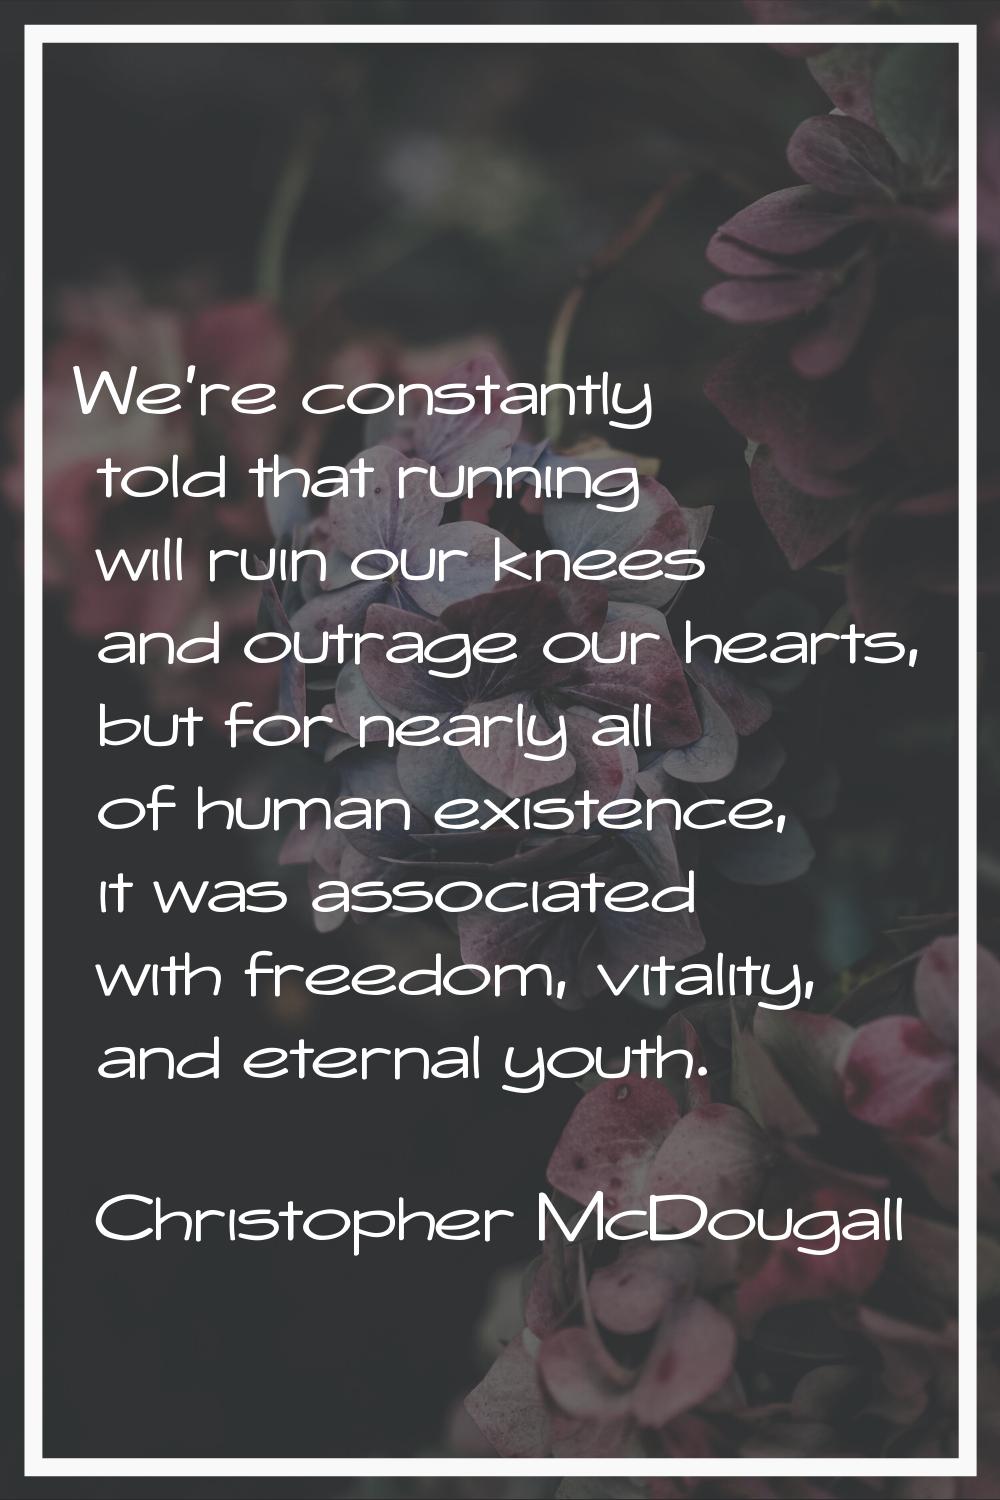 We're constantly told that running will ruin our knees and outrage our hearts, but for nearly all o